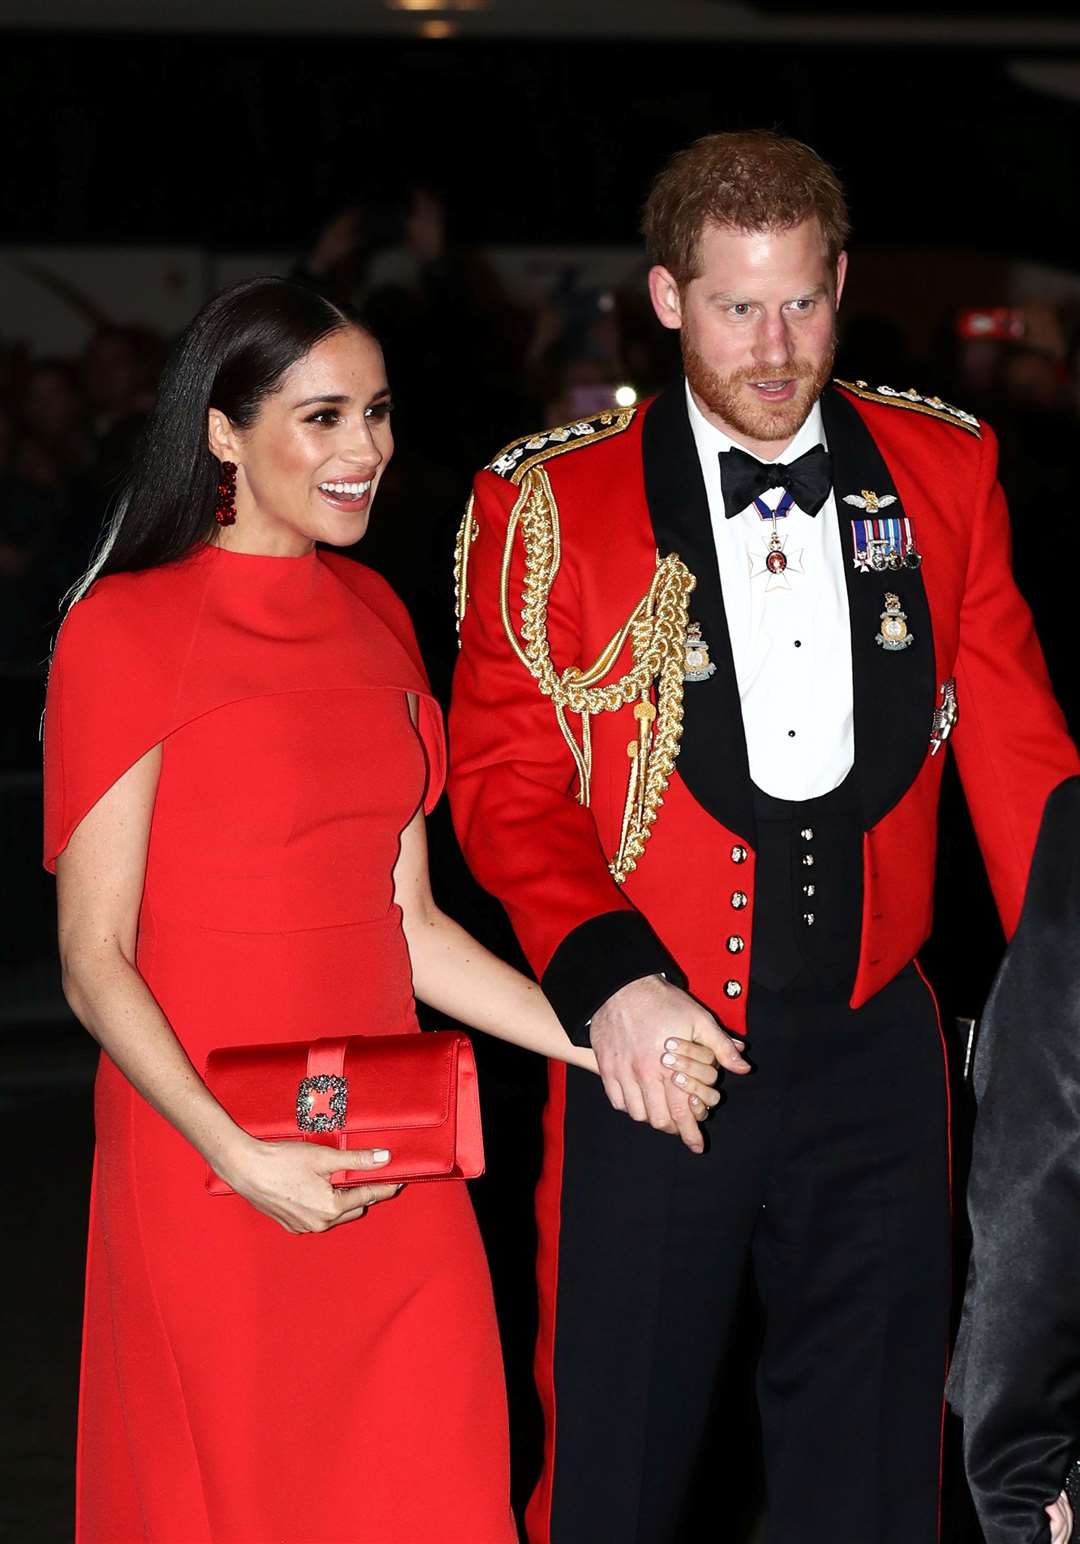 The Duke and Duchess of Sussex arriving at the Royal Albert Hall in London to attend the Mountbatten Festival of Music (Simon Dawson/PA)